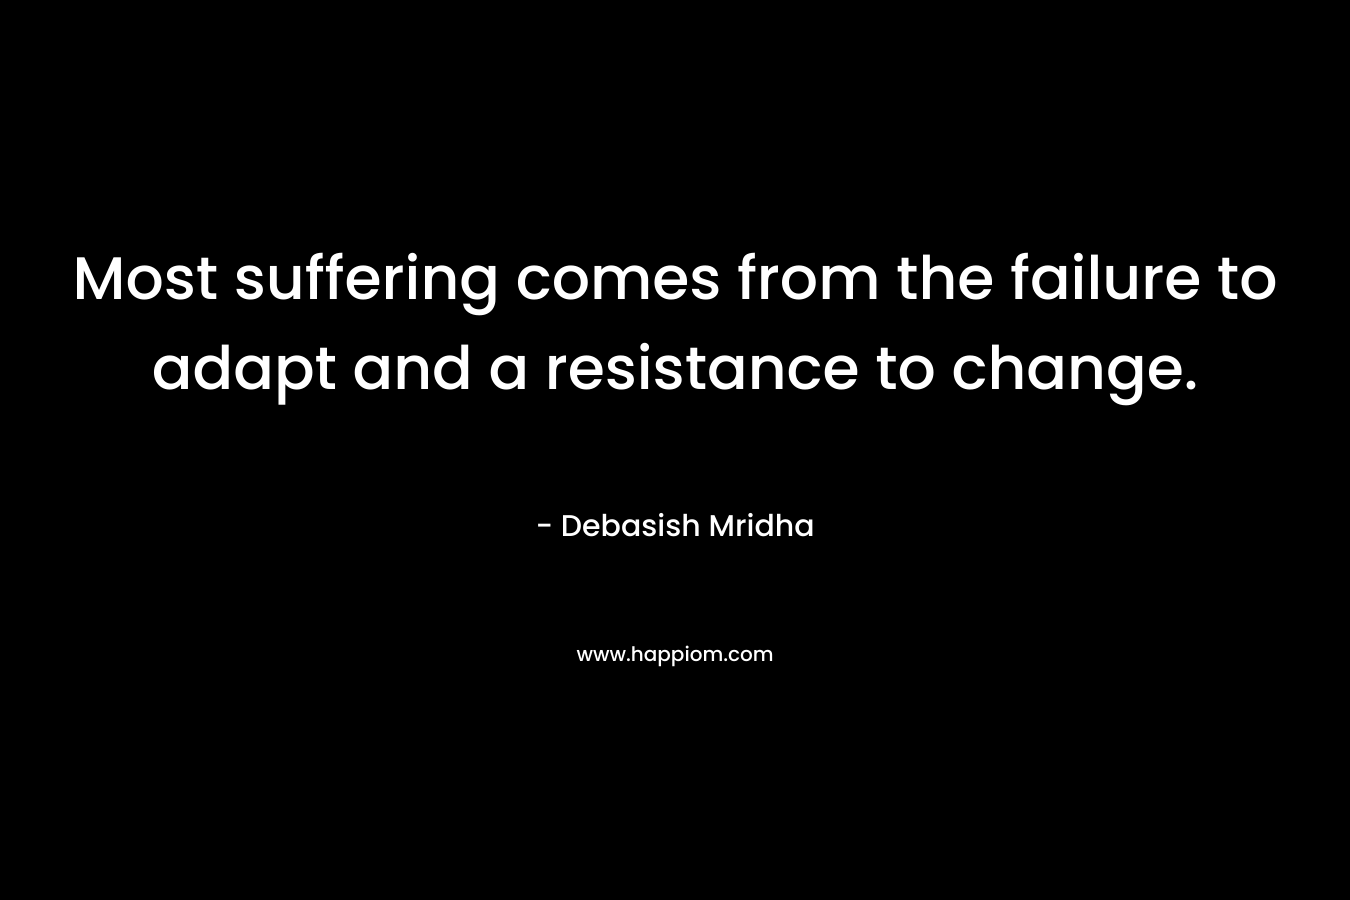 Most suffering comes from the failure to adapt and a resistance to change.